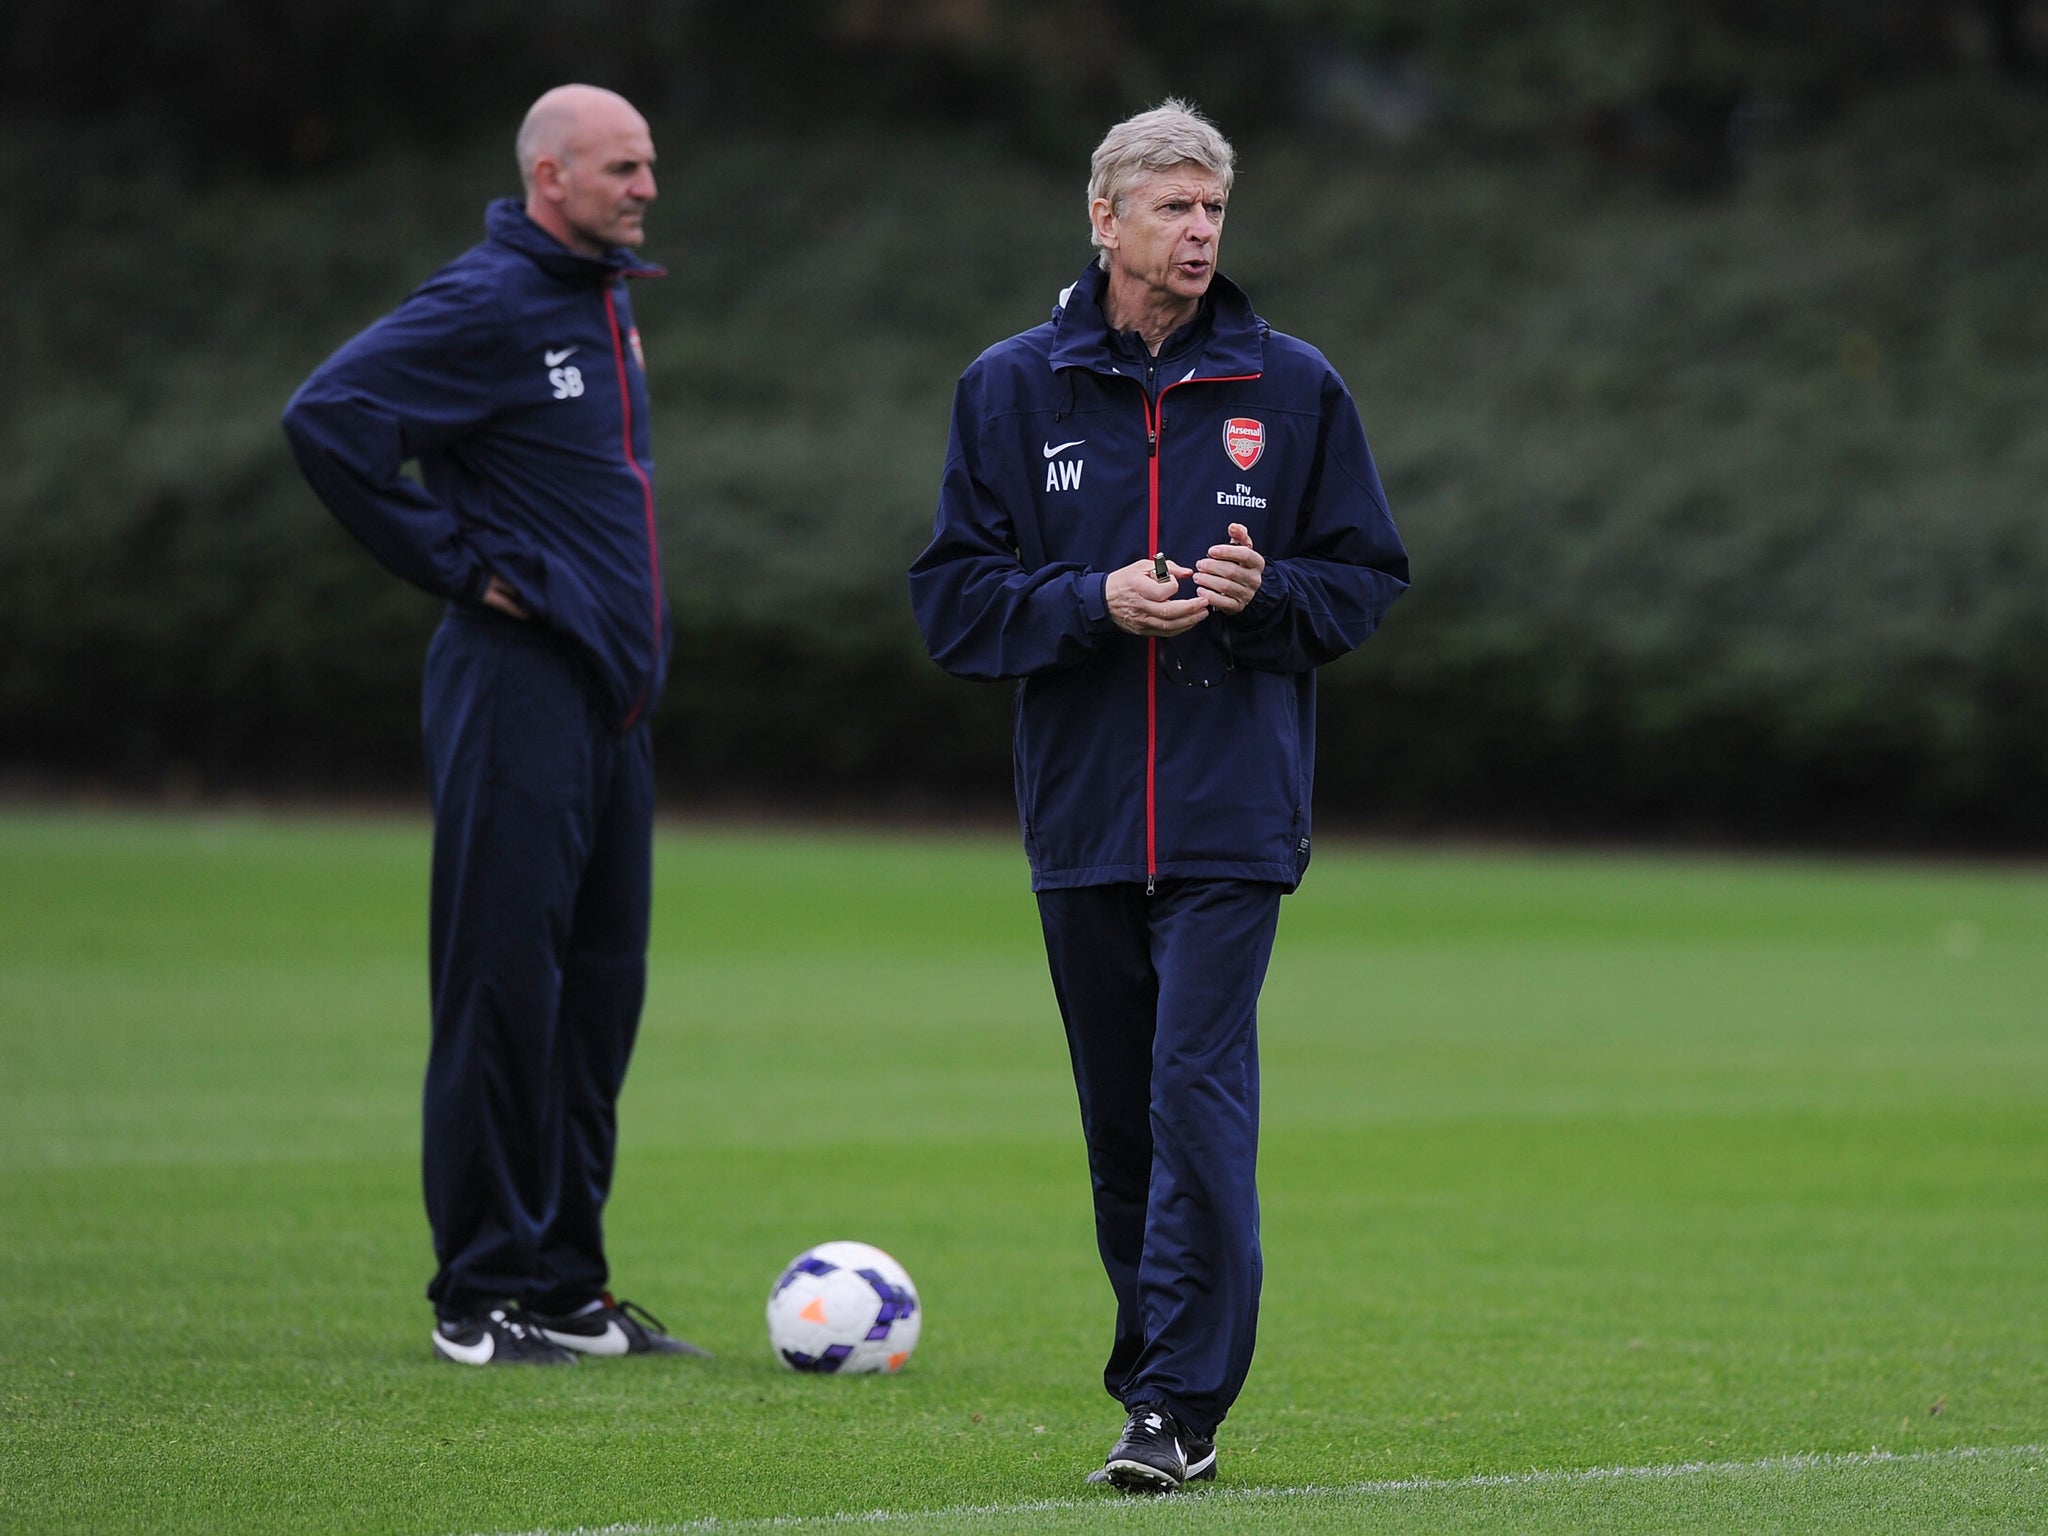 Arsene Wenger wants Premier League clubs to have feeder teams in the lower leagues to help develop young players